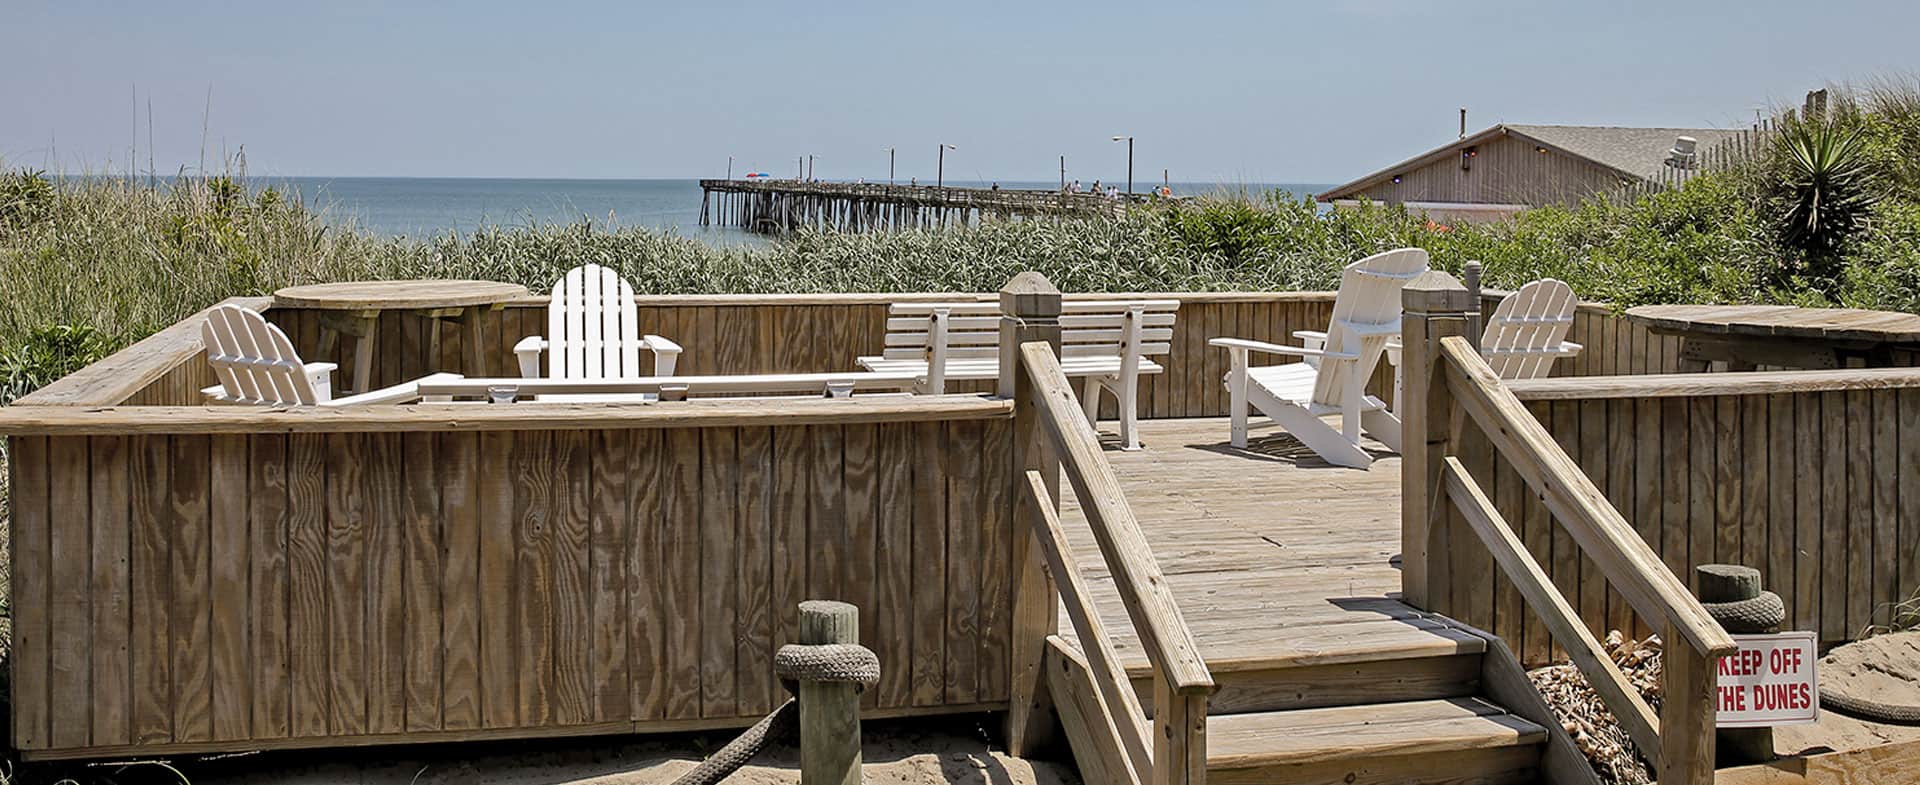 9 Unique, Affordable
Outer Banks Properties